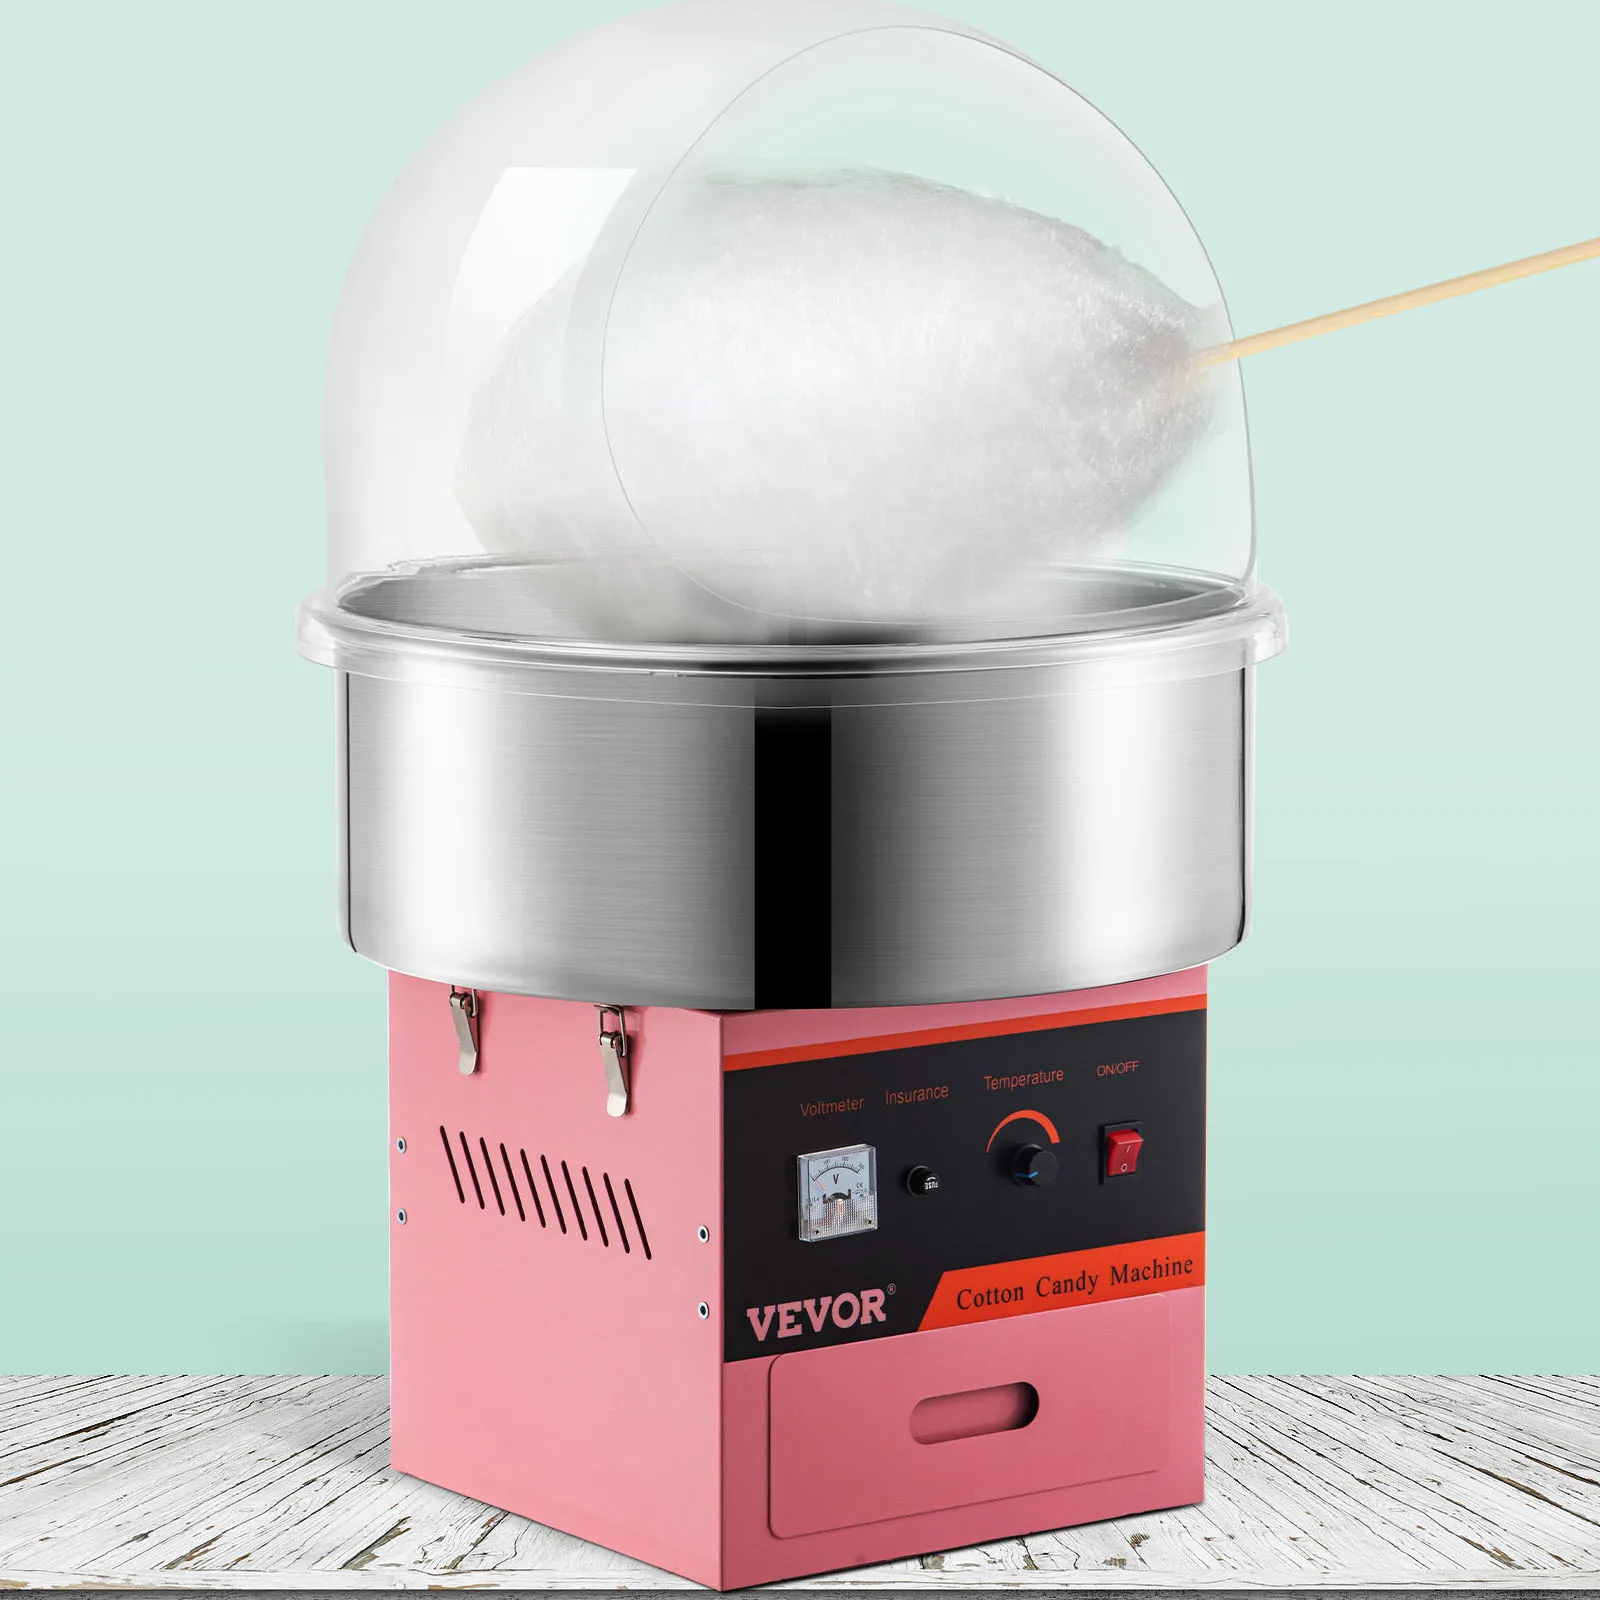 VEVOR Electric Cotton Candy Machine Commercial Sugar Candy Floss Maker Temperature Controls for Party Festival Carnival Home DIY